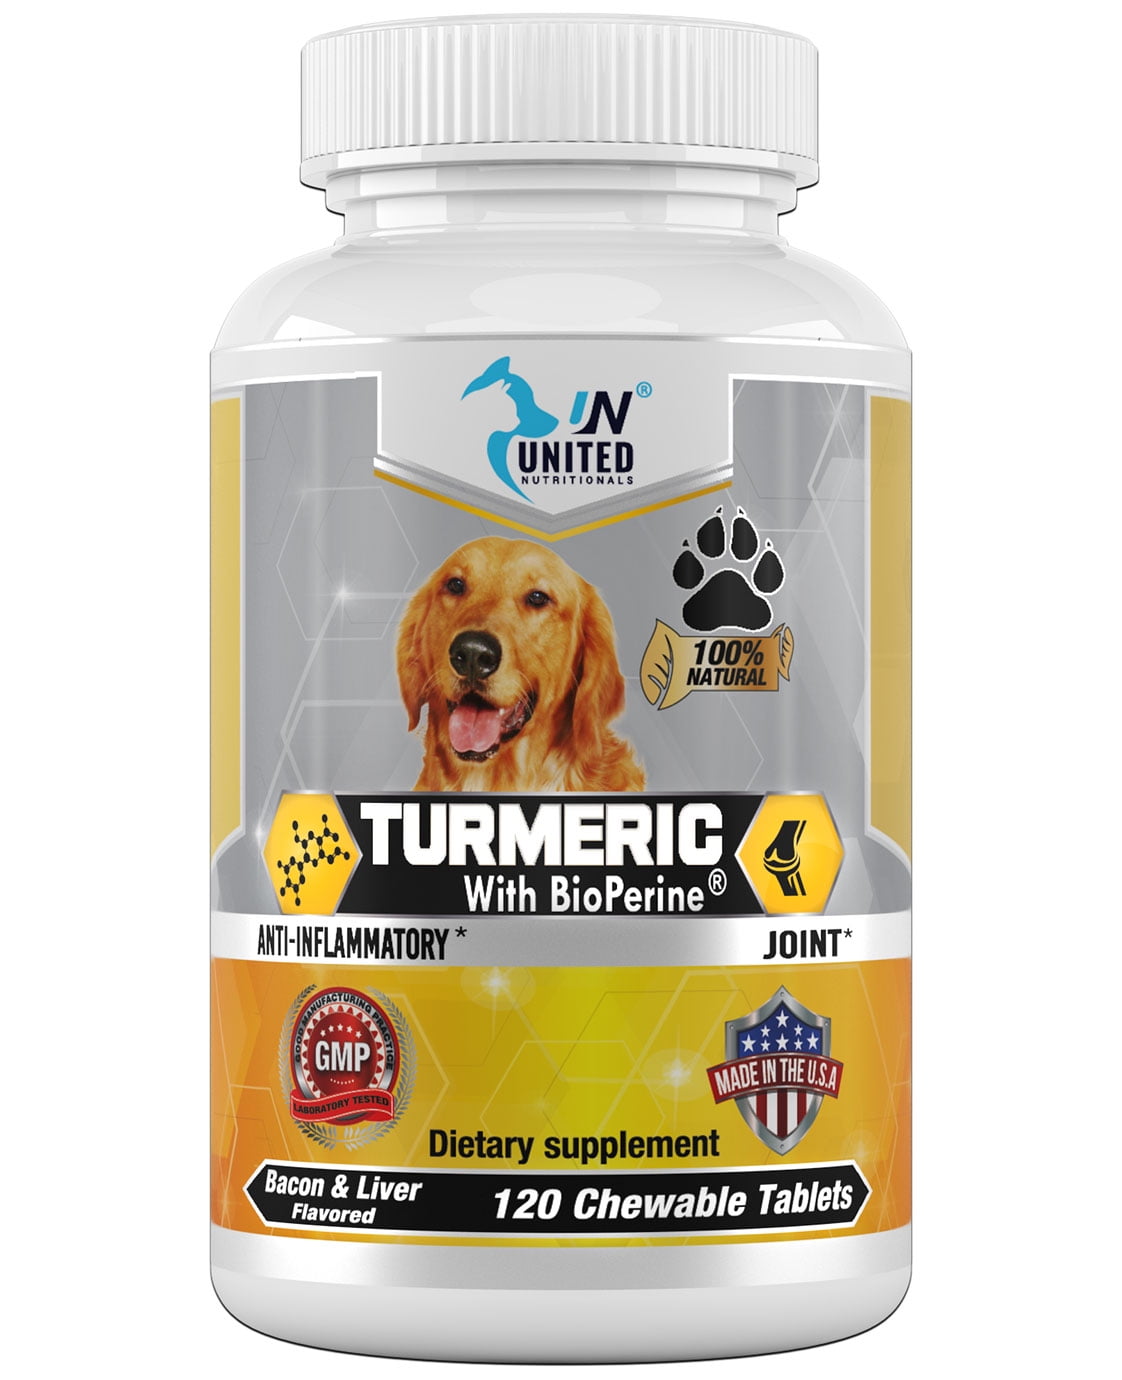 Over the counter anti inflammatory for dogs